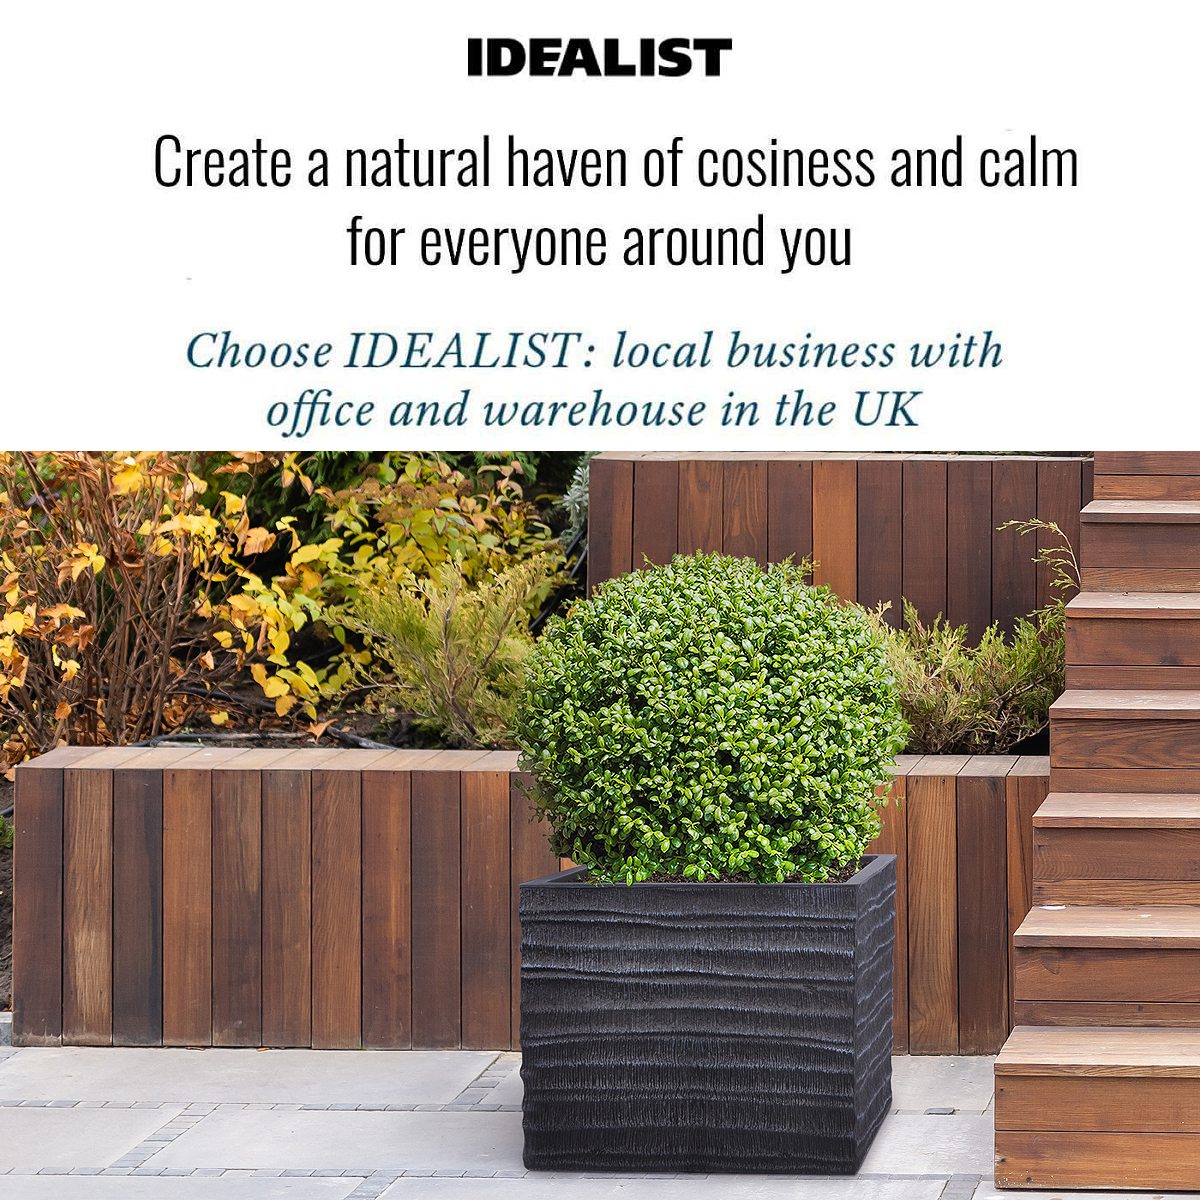 IDEALIST Lite Straw Ribbed Square Outdoor Planter